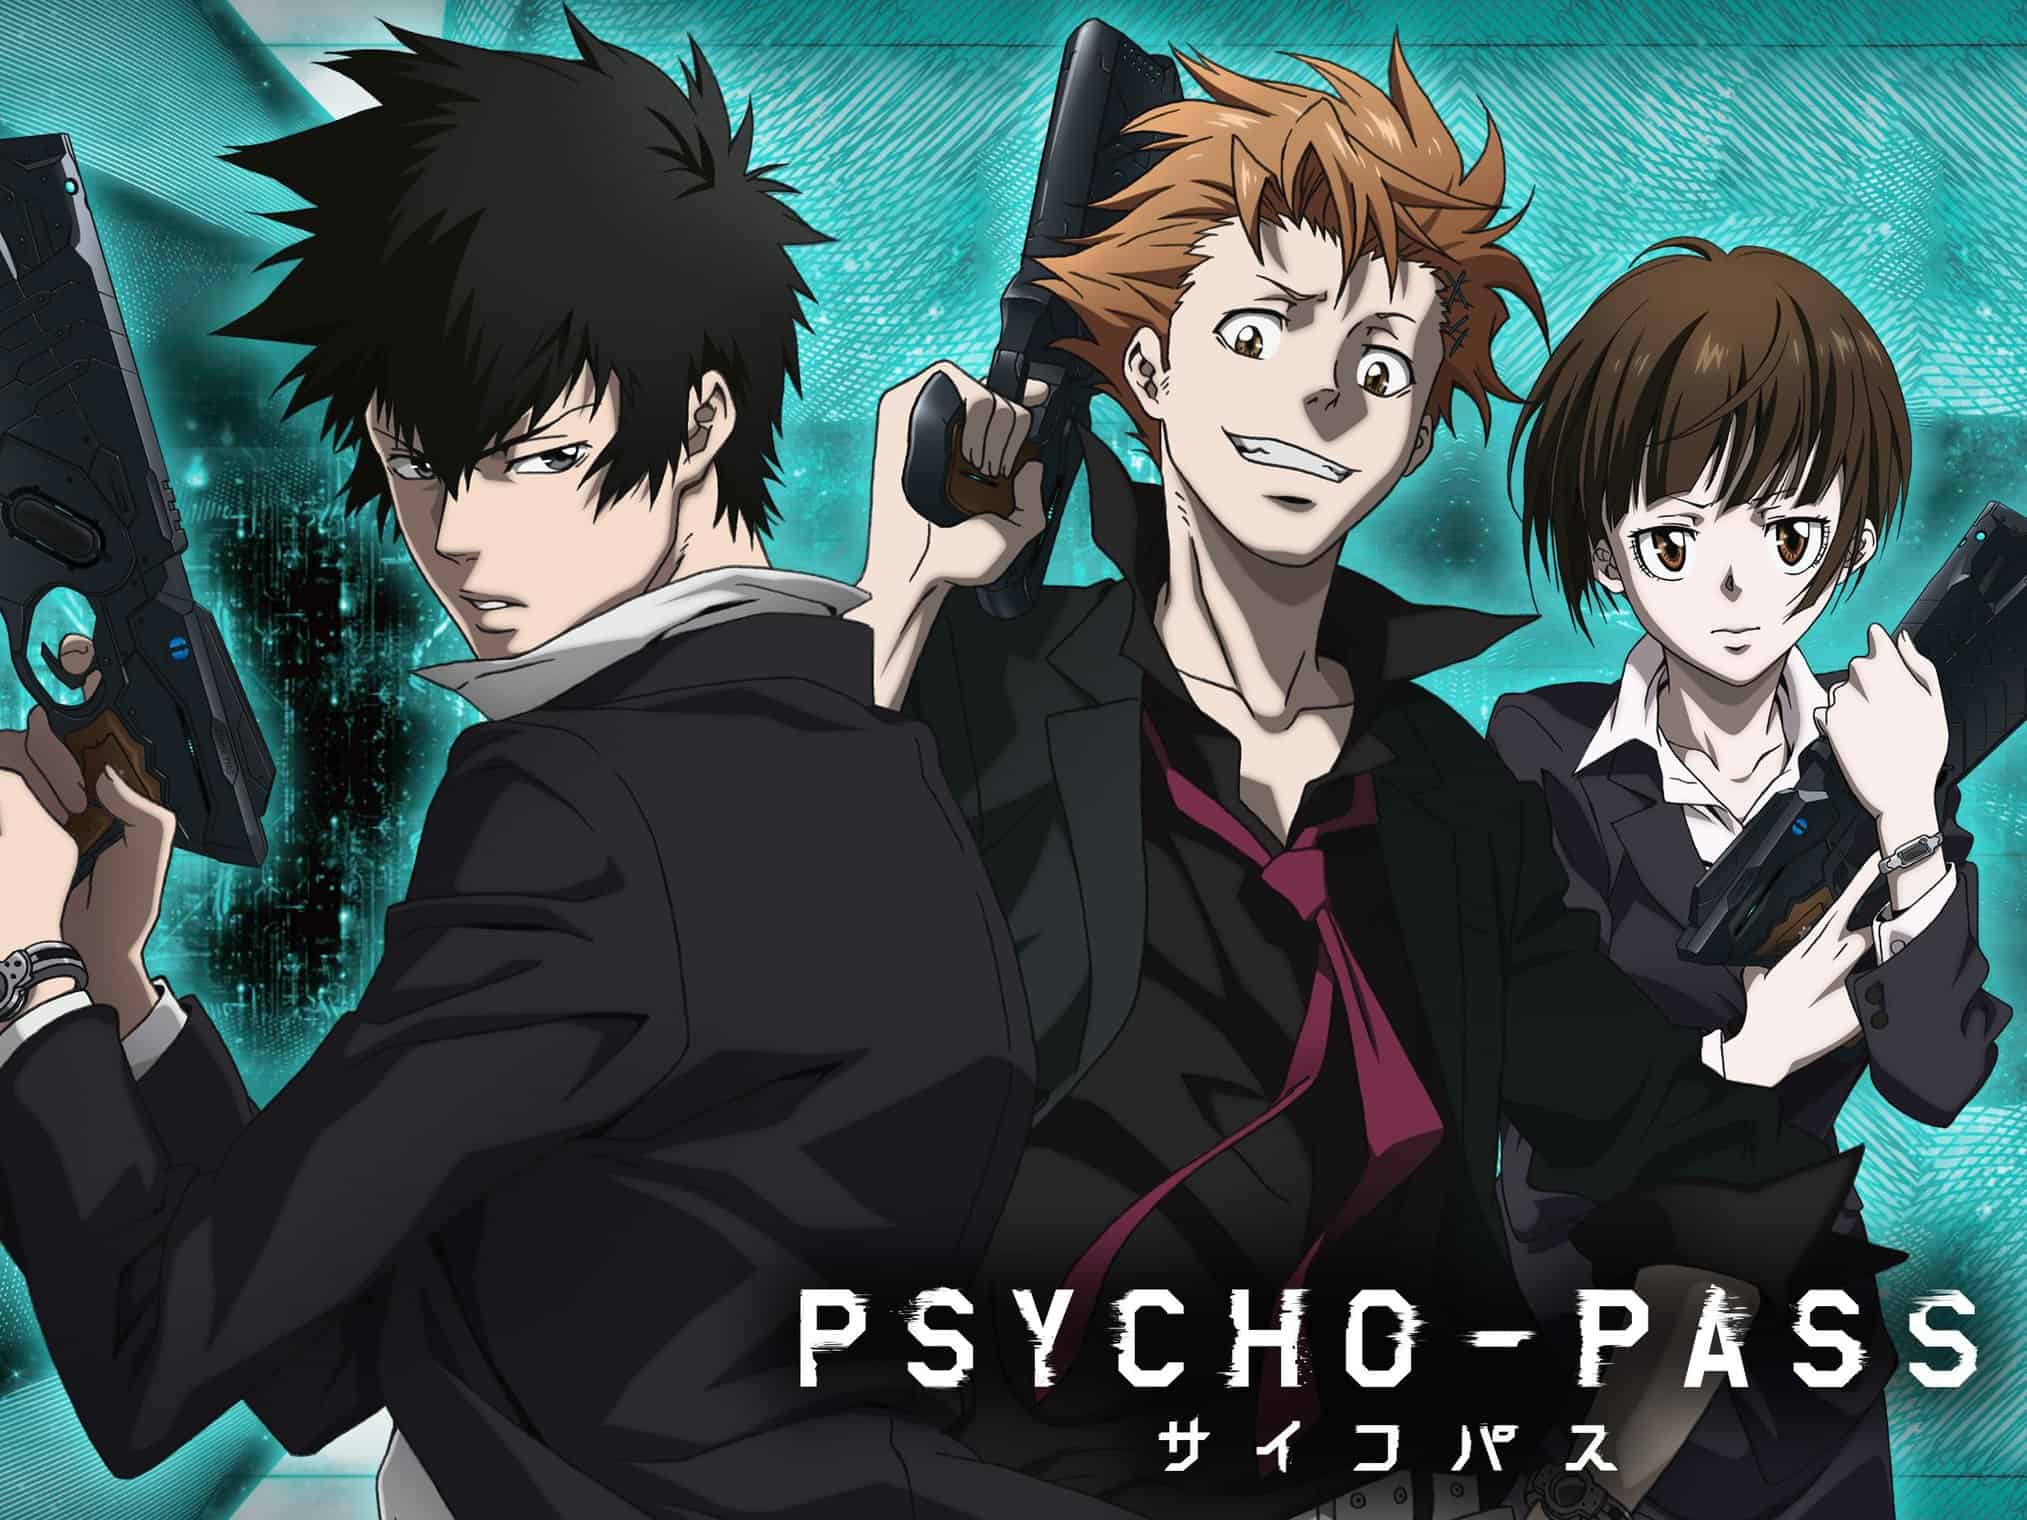 Psycho Pass anime similar to Death Note